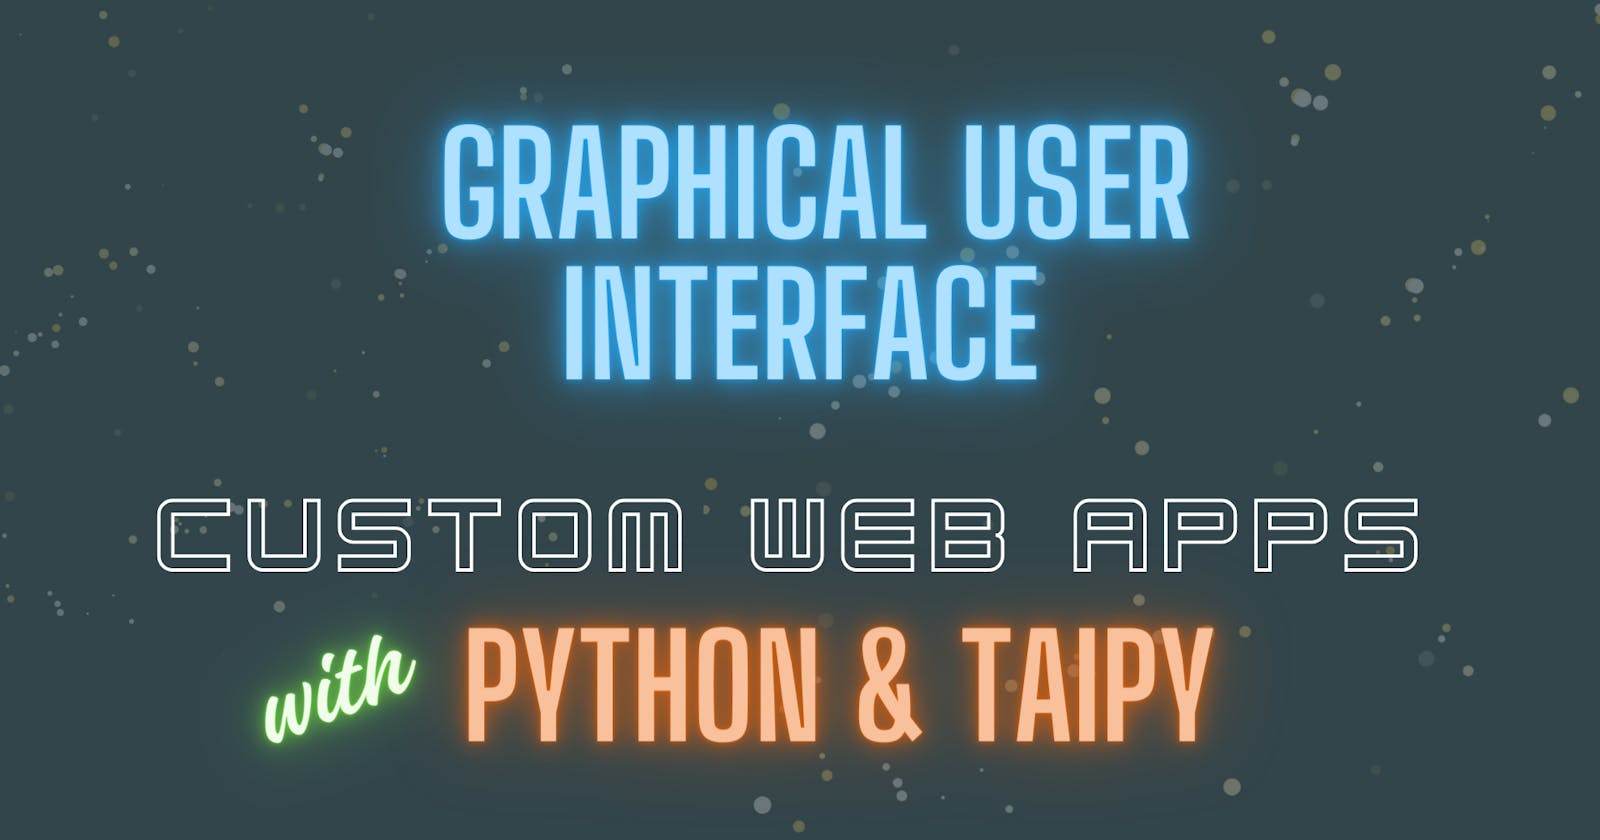 Building an Interface with Taipy